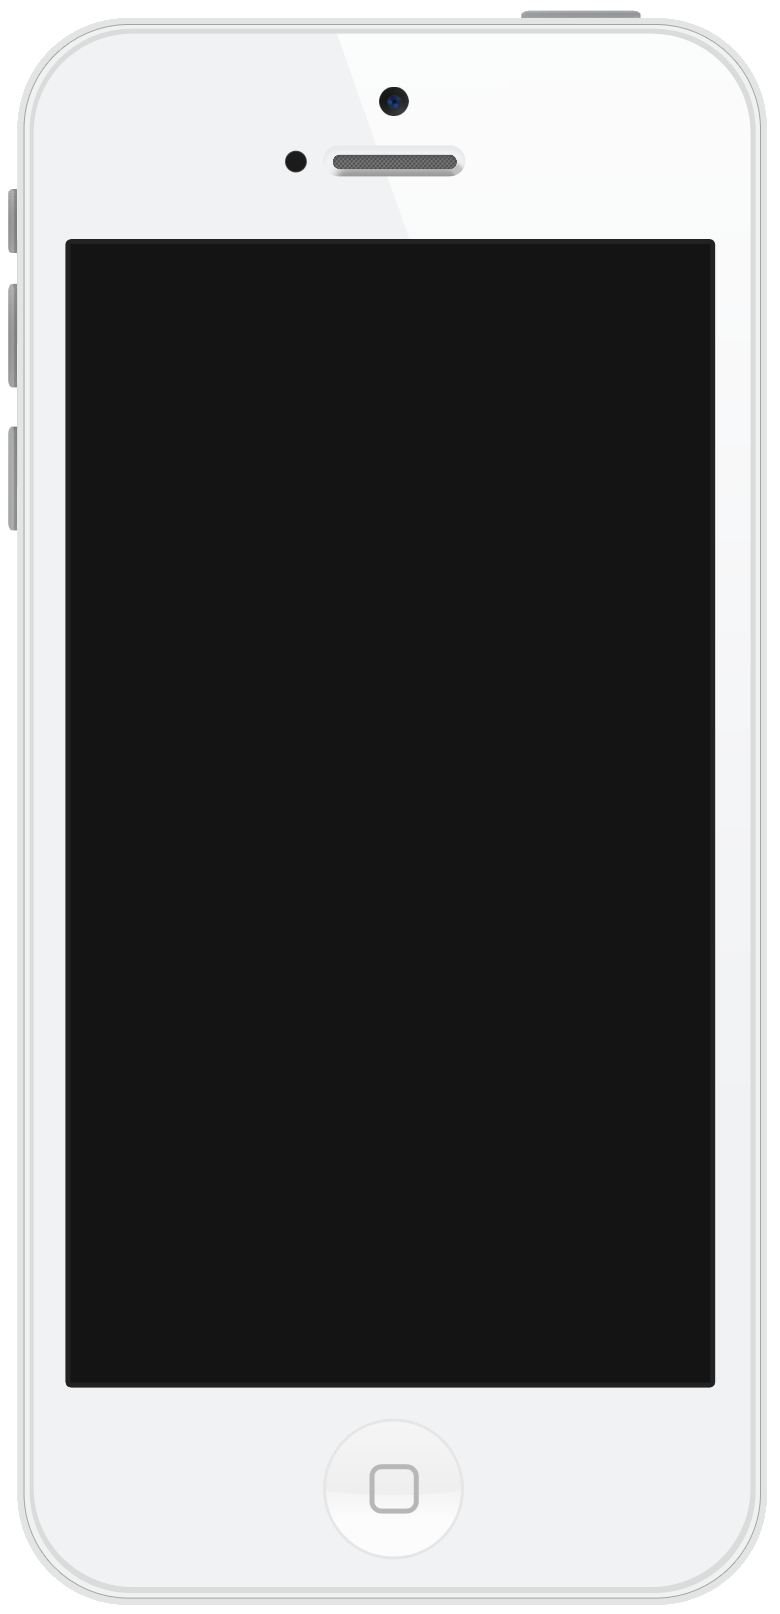 Iphone PNG Black And White - 52197